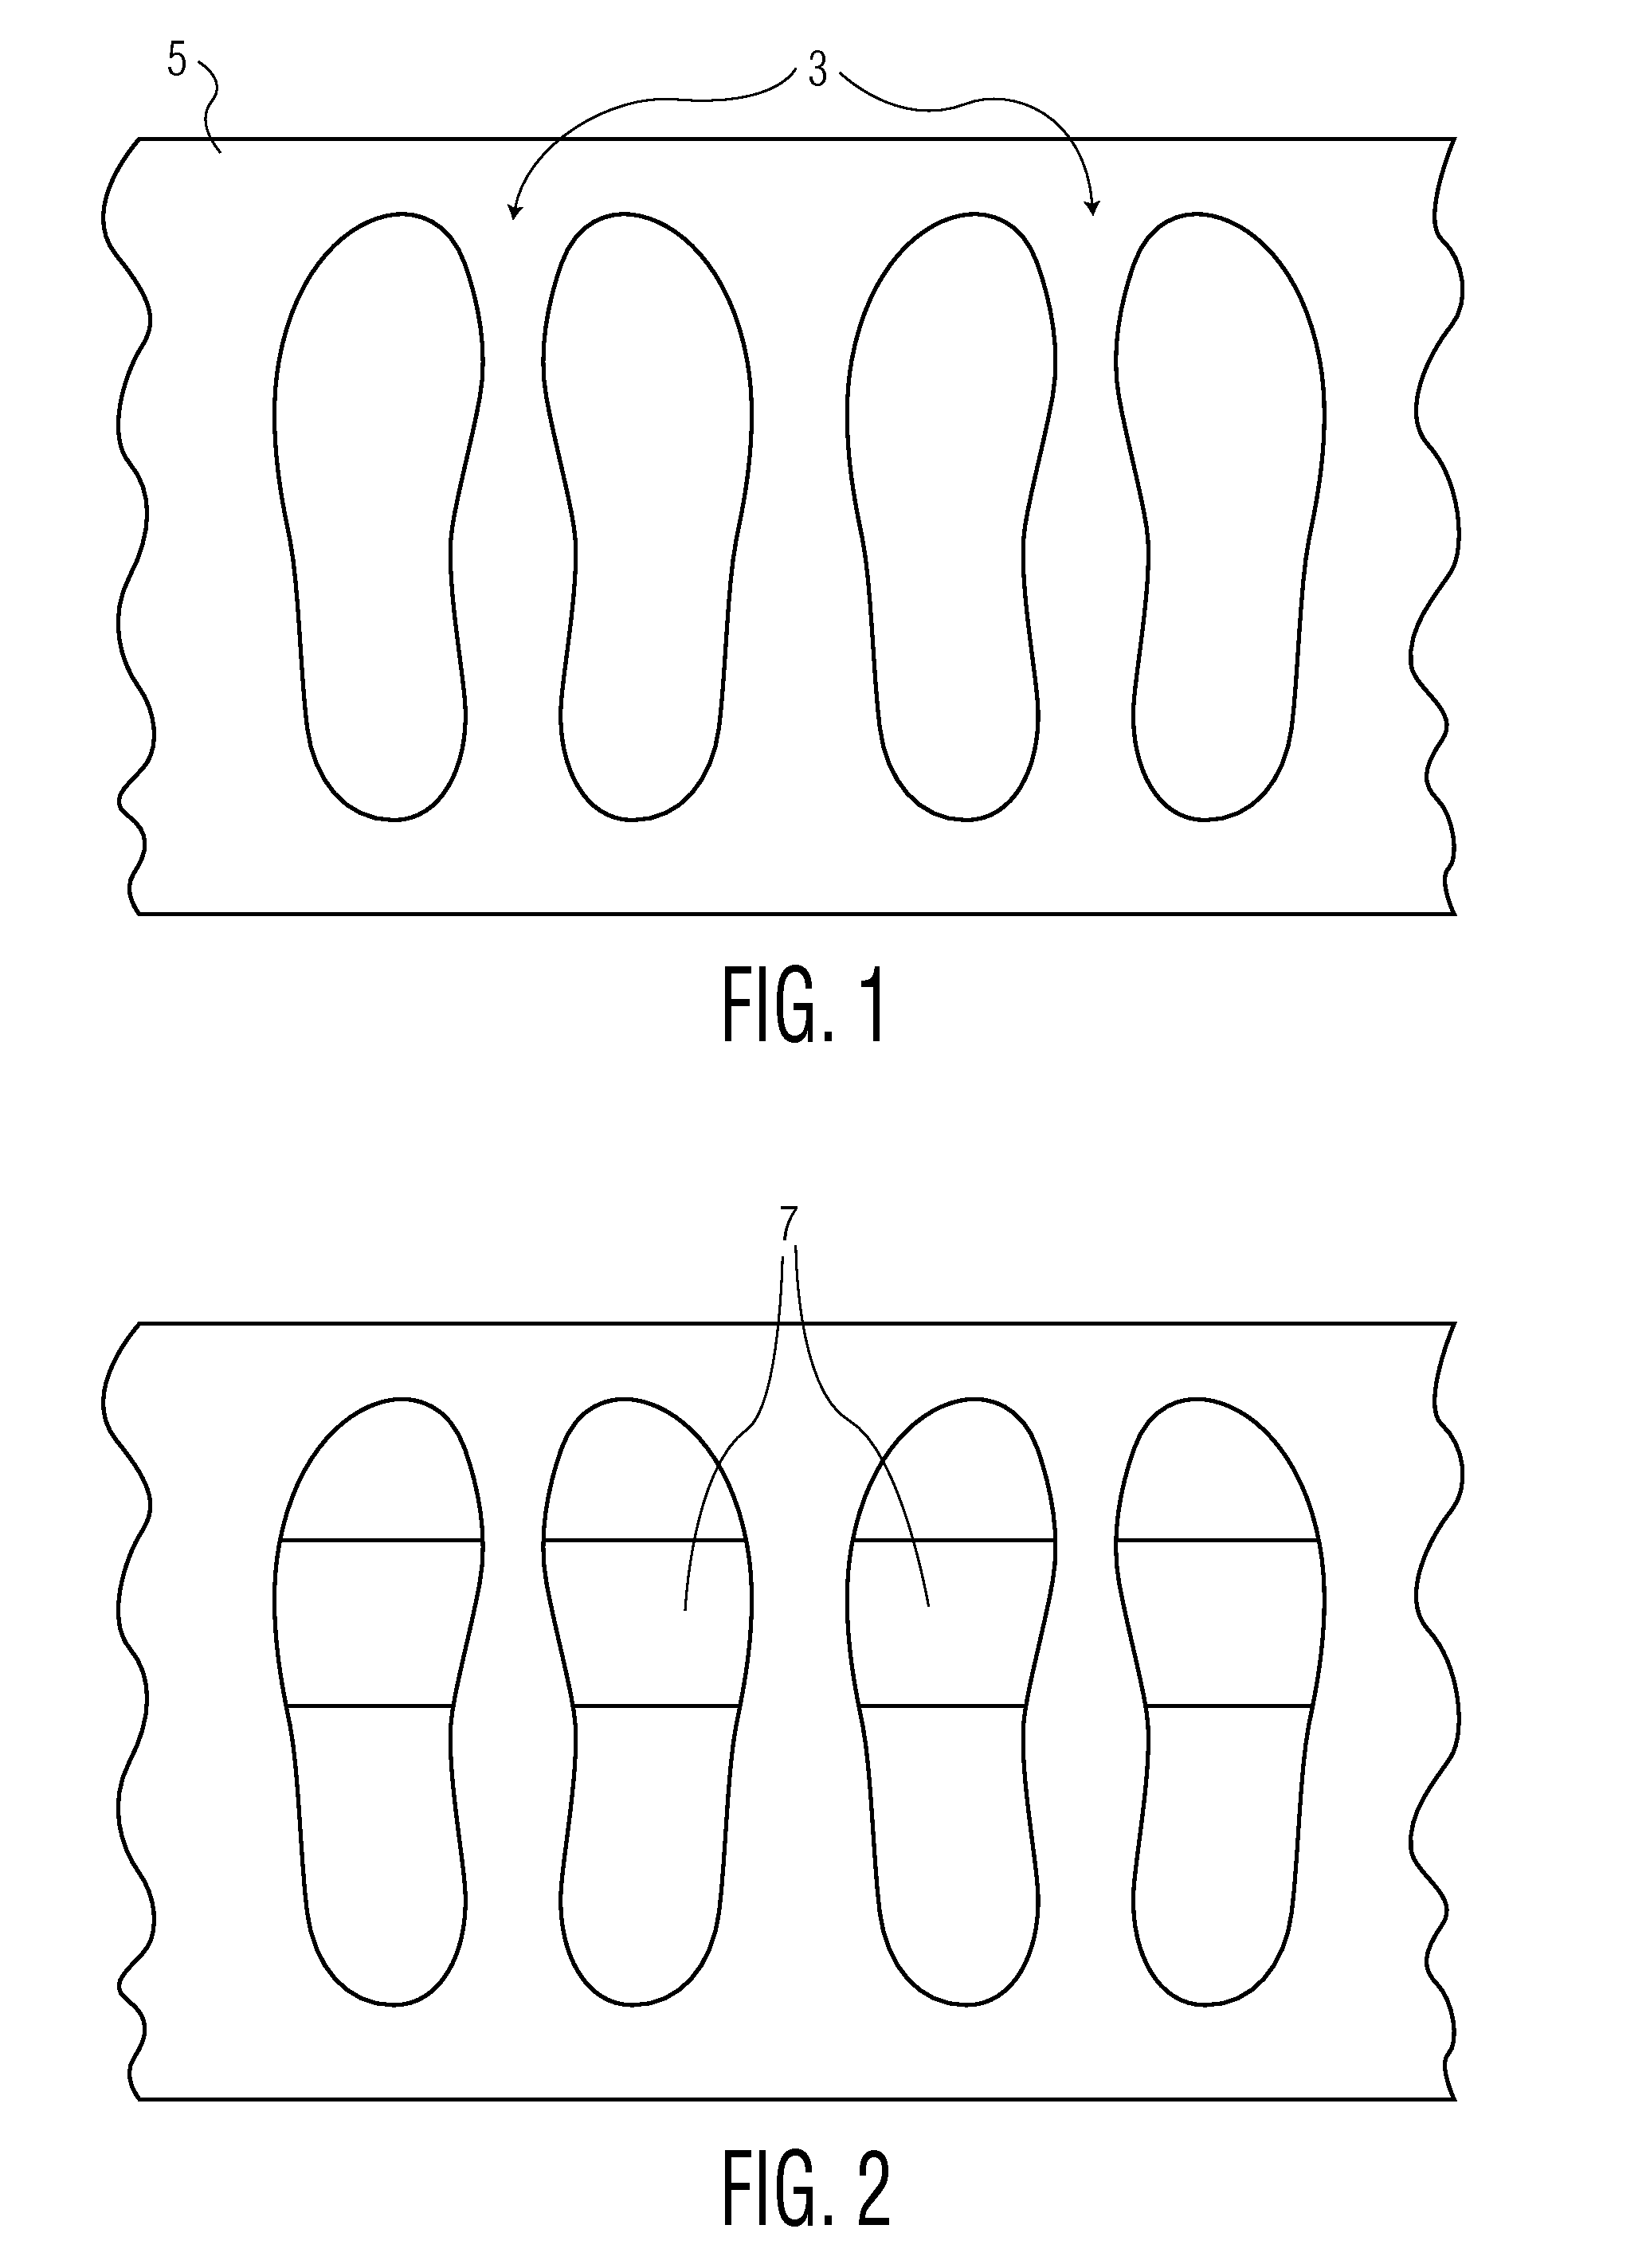 Method and Apparatus for Applying Flocking to the Outsole of Shoe Under Pressure